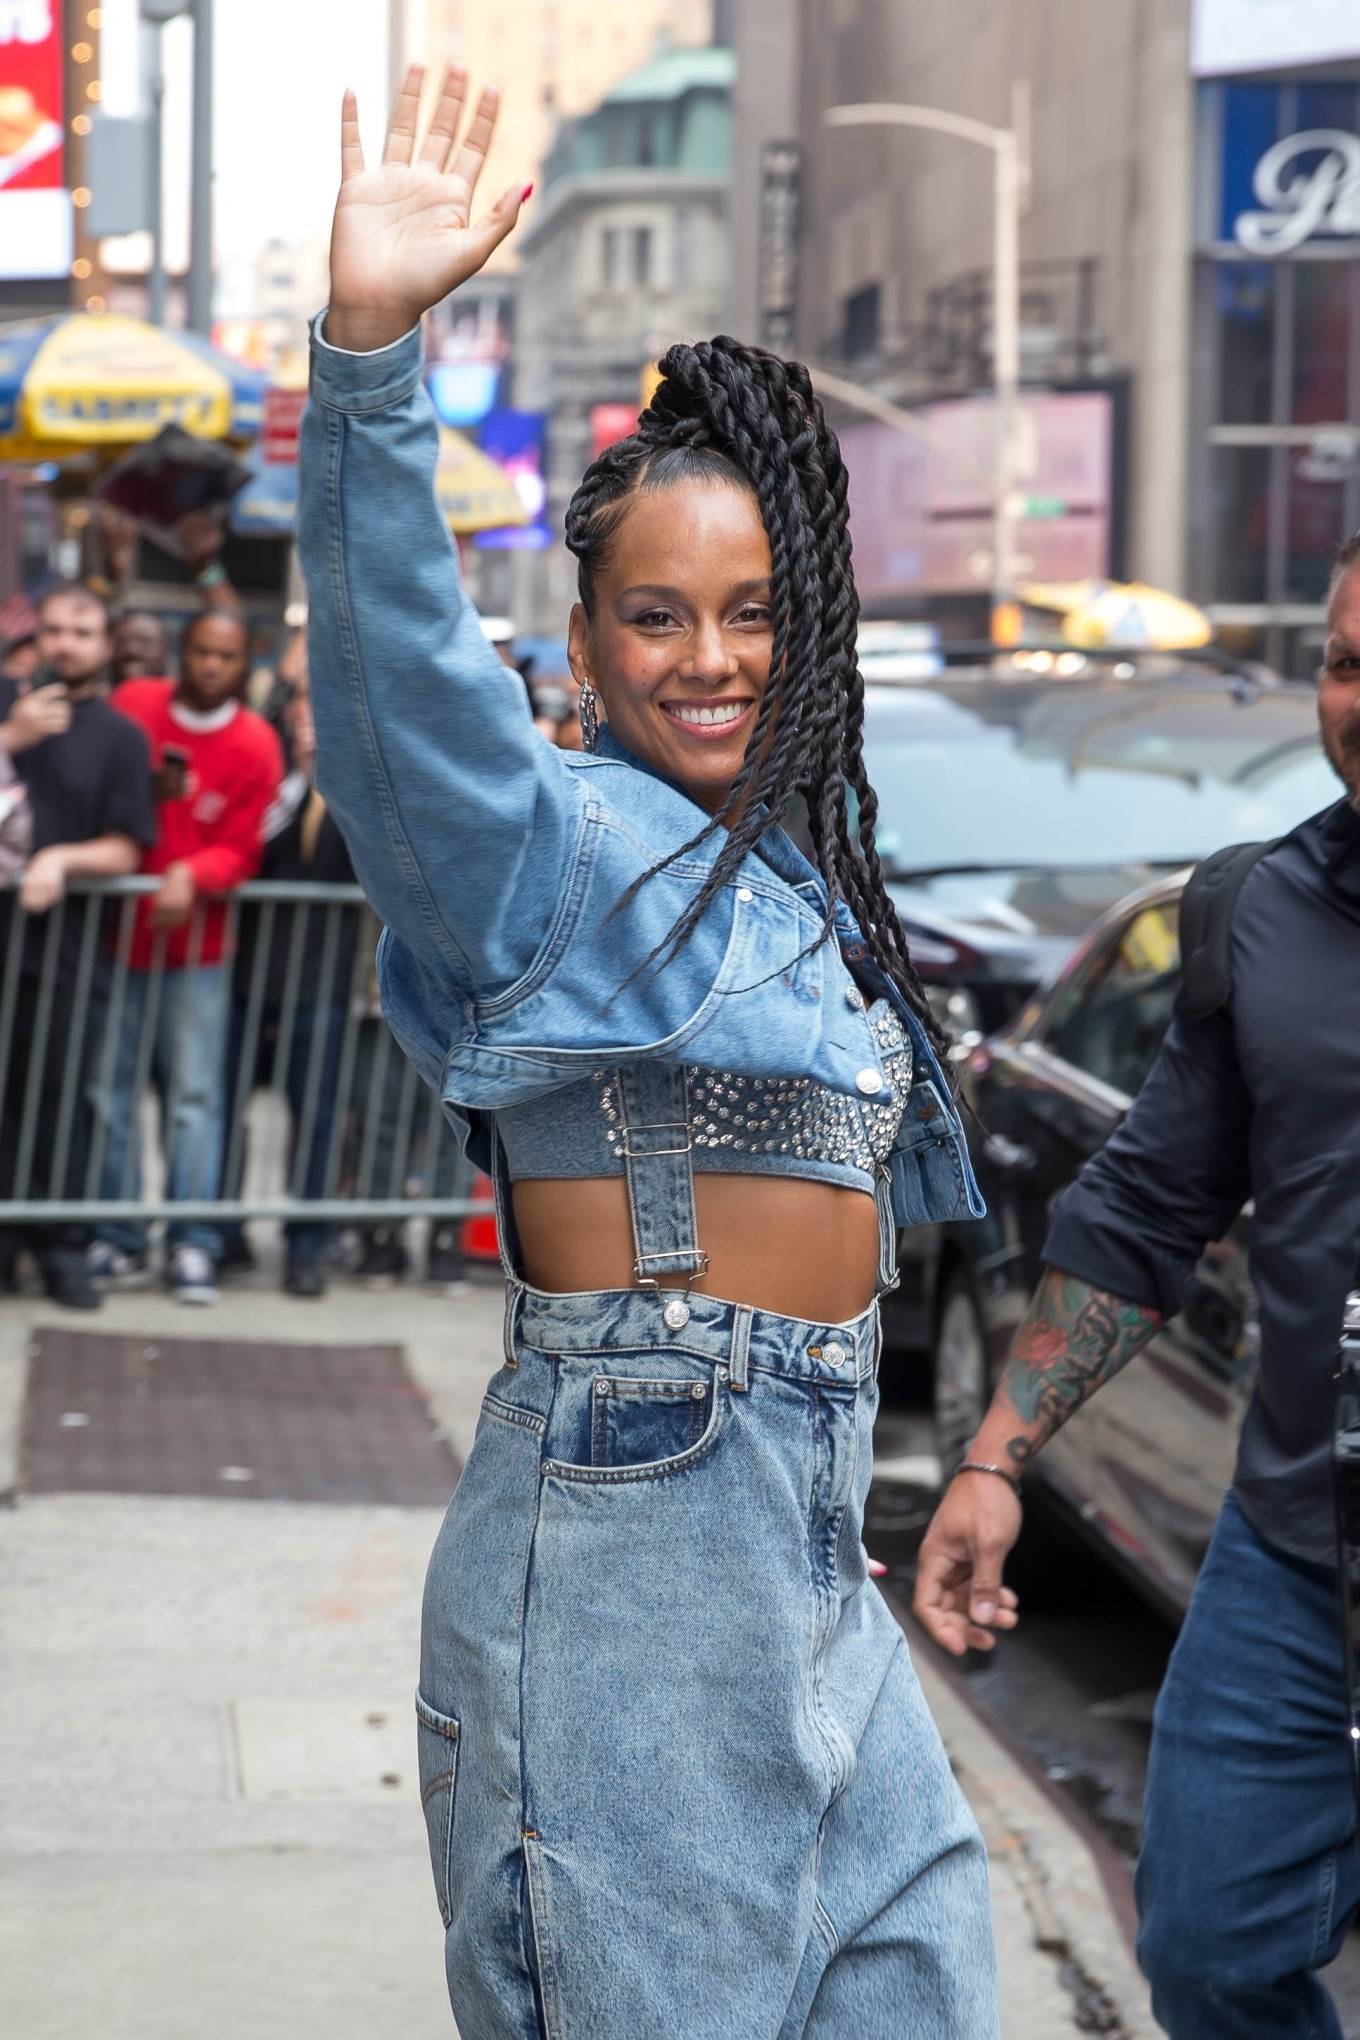 Alicia Keys - Spotted in the Times Square area of New York